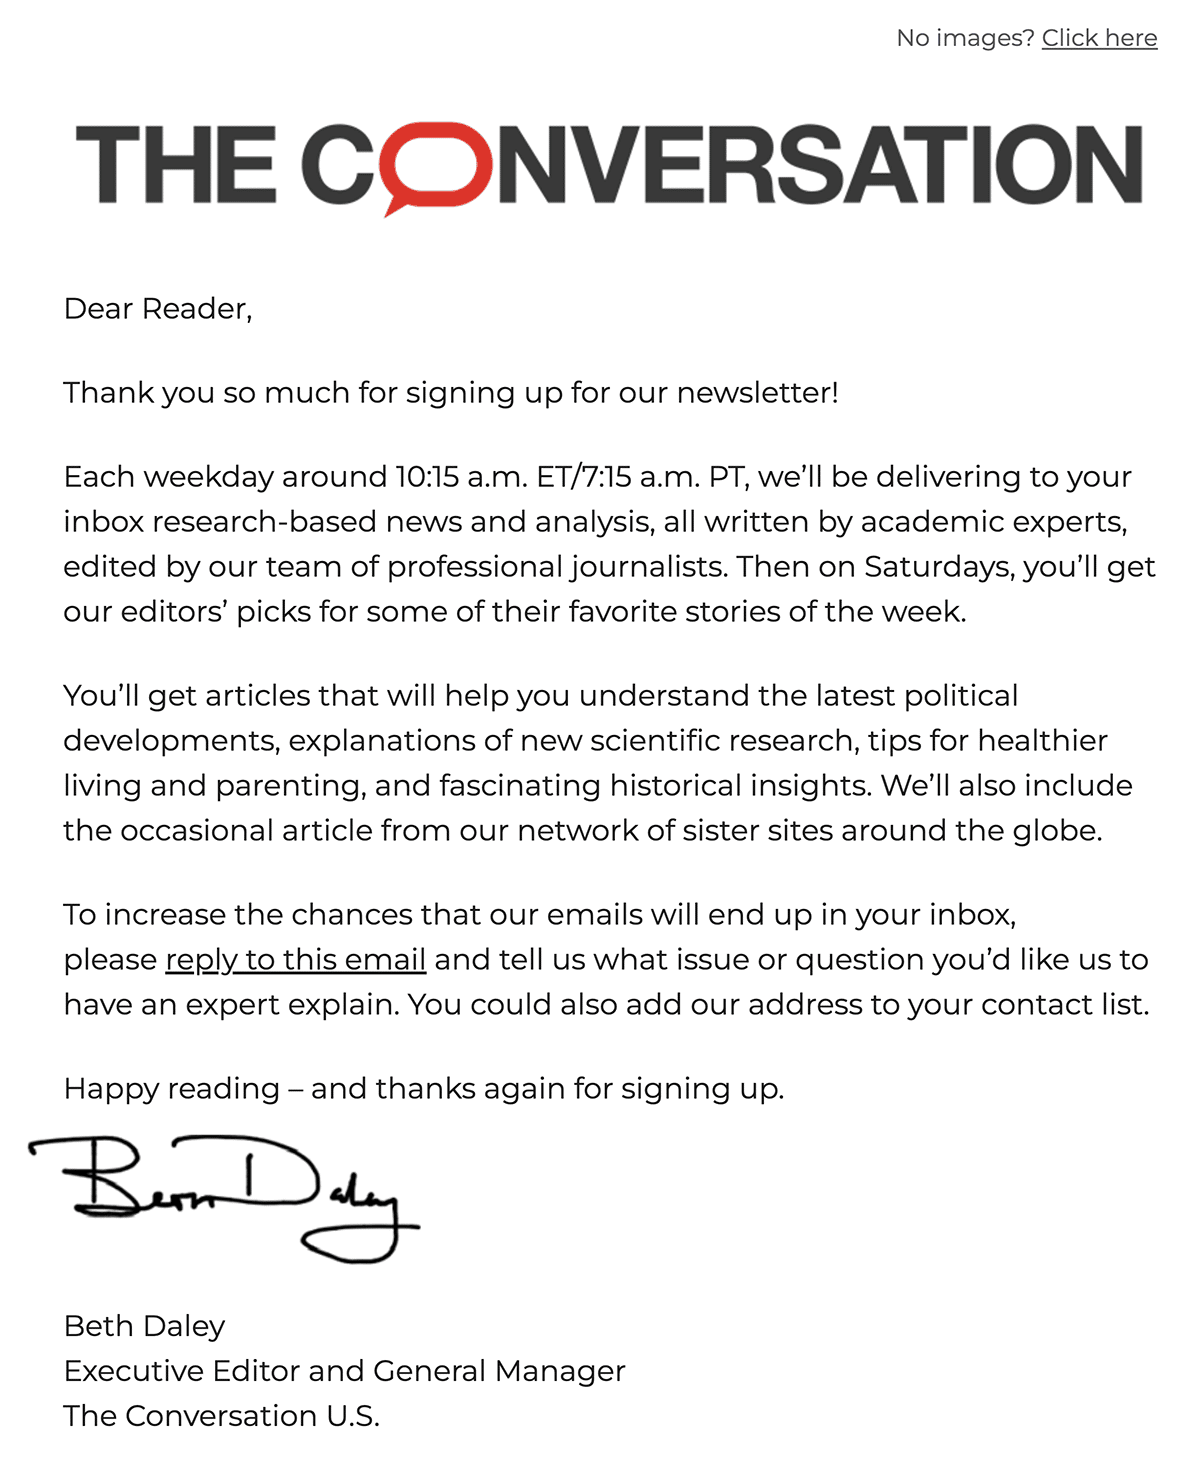 The Conversation Welcome Email 2022